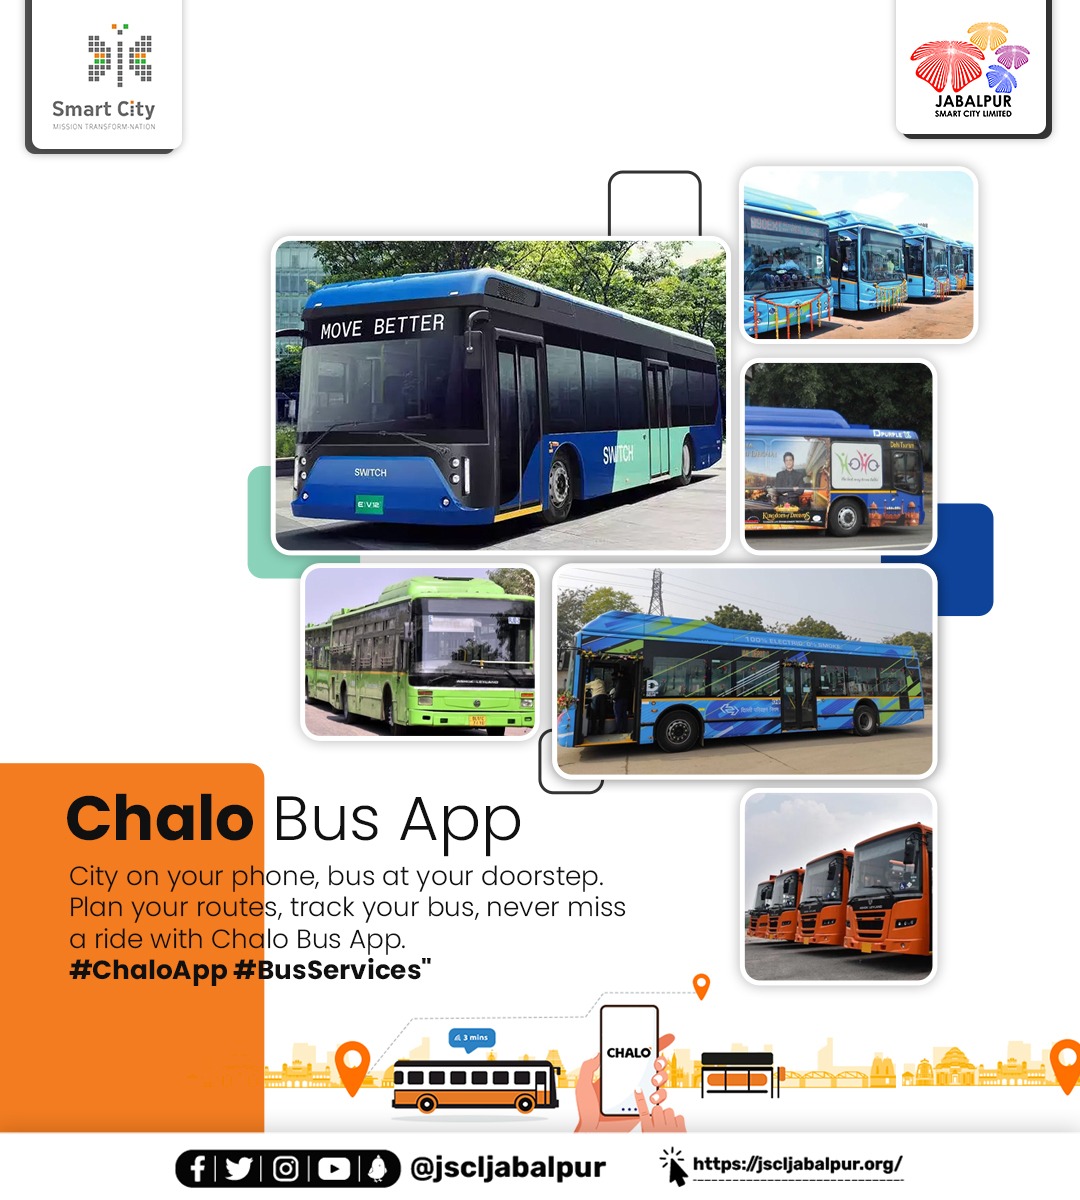 Navigate the city hassle-free!

Chalo Bus App brings buses to you. Plan routes, track rides. Your urban travel companion. 🚌🗺️ 

#ChaloApp #BusServices